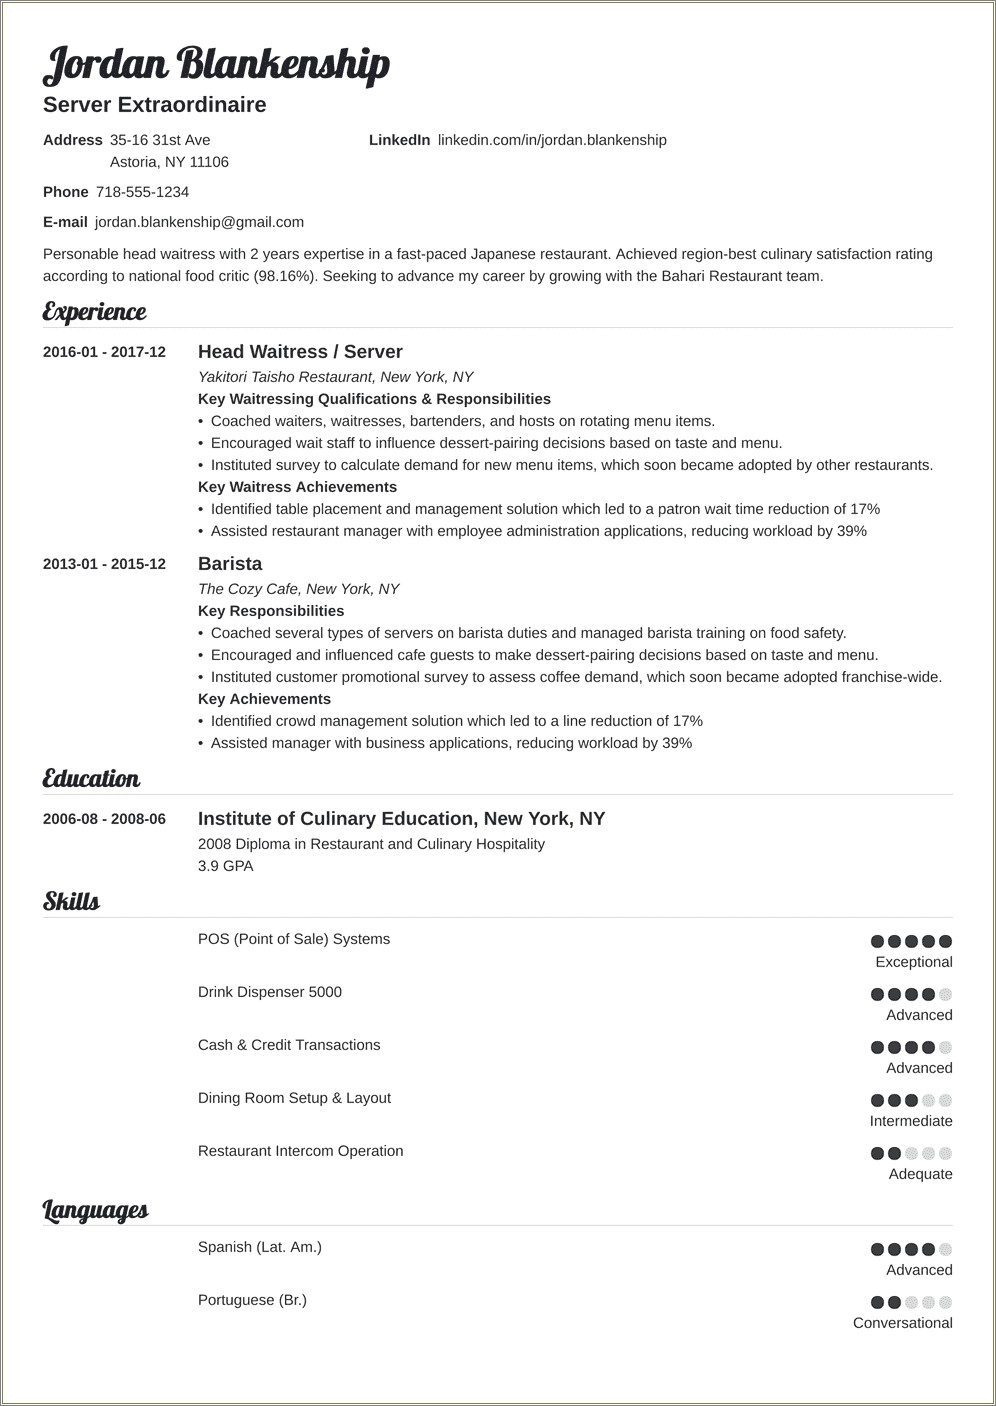 Sample Resume For School Food Service Manager